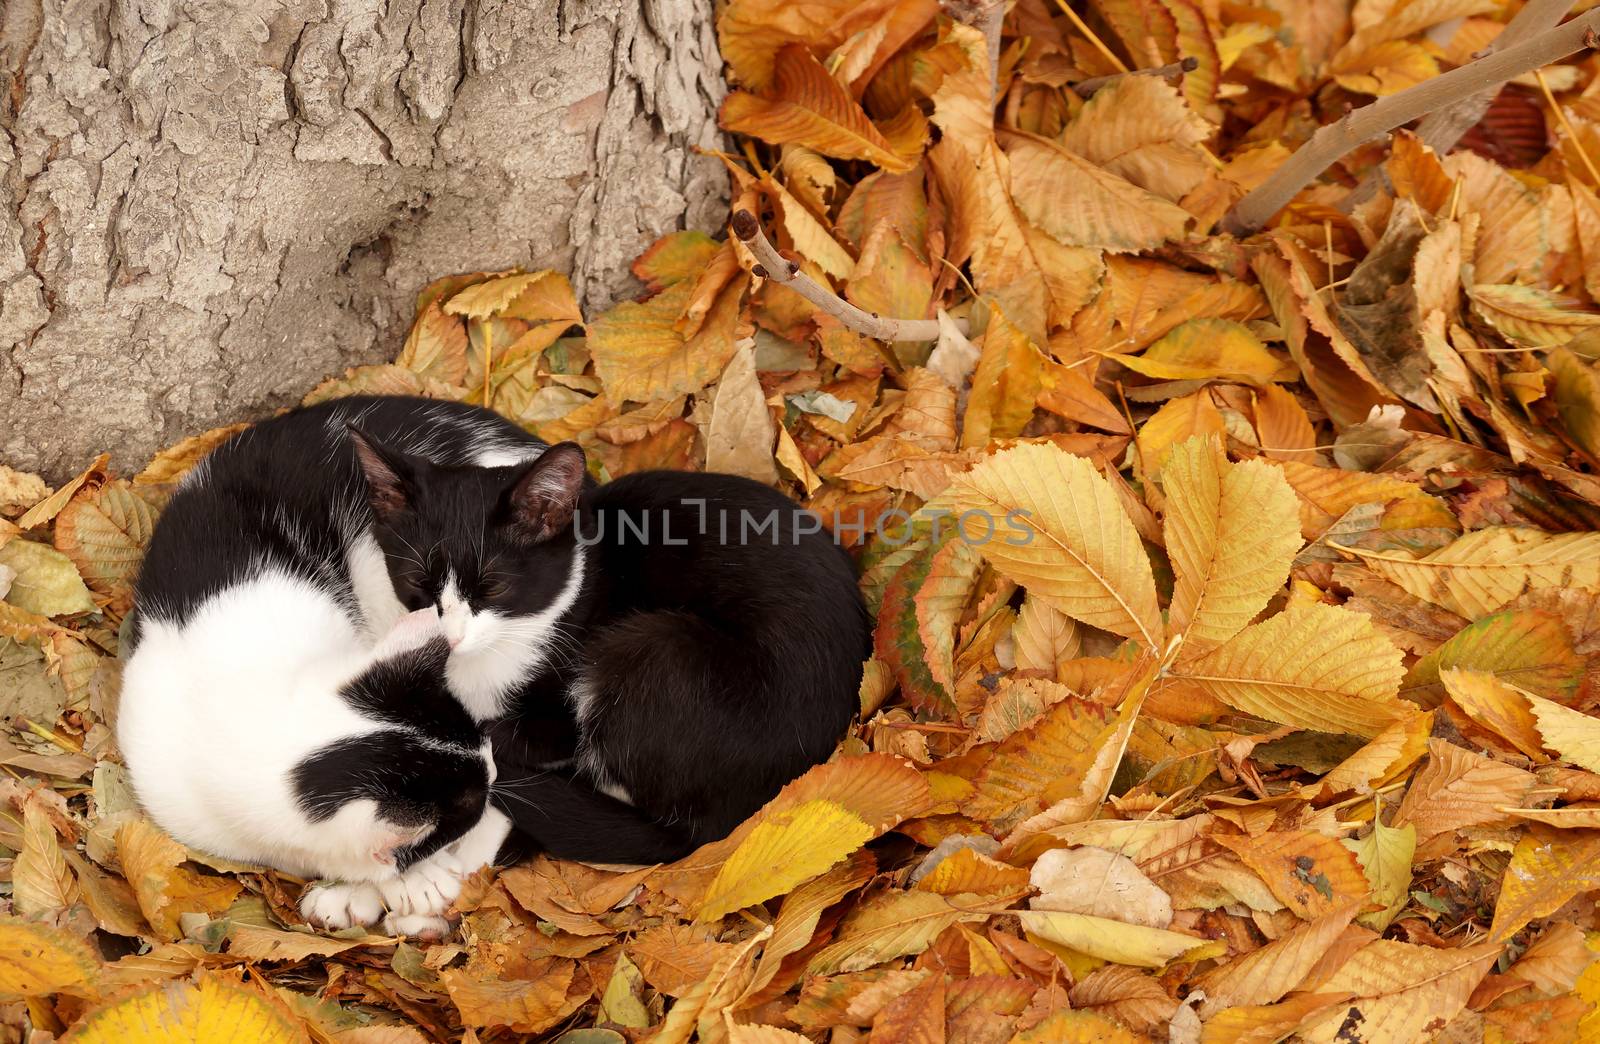 Cats and fall by Vadimdem